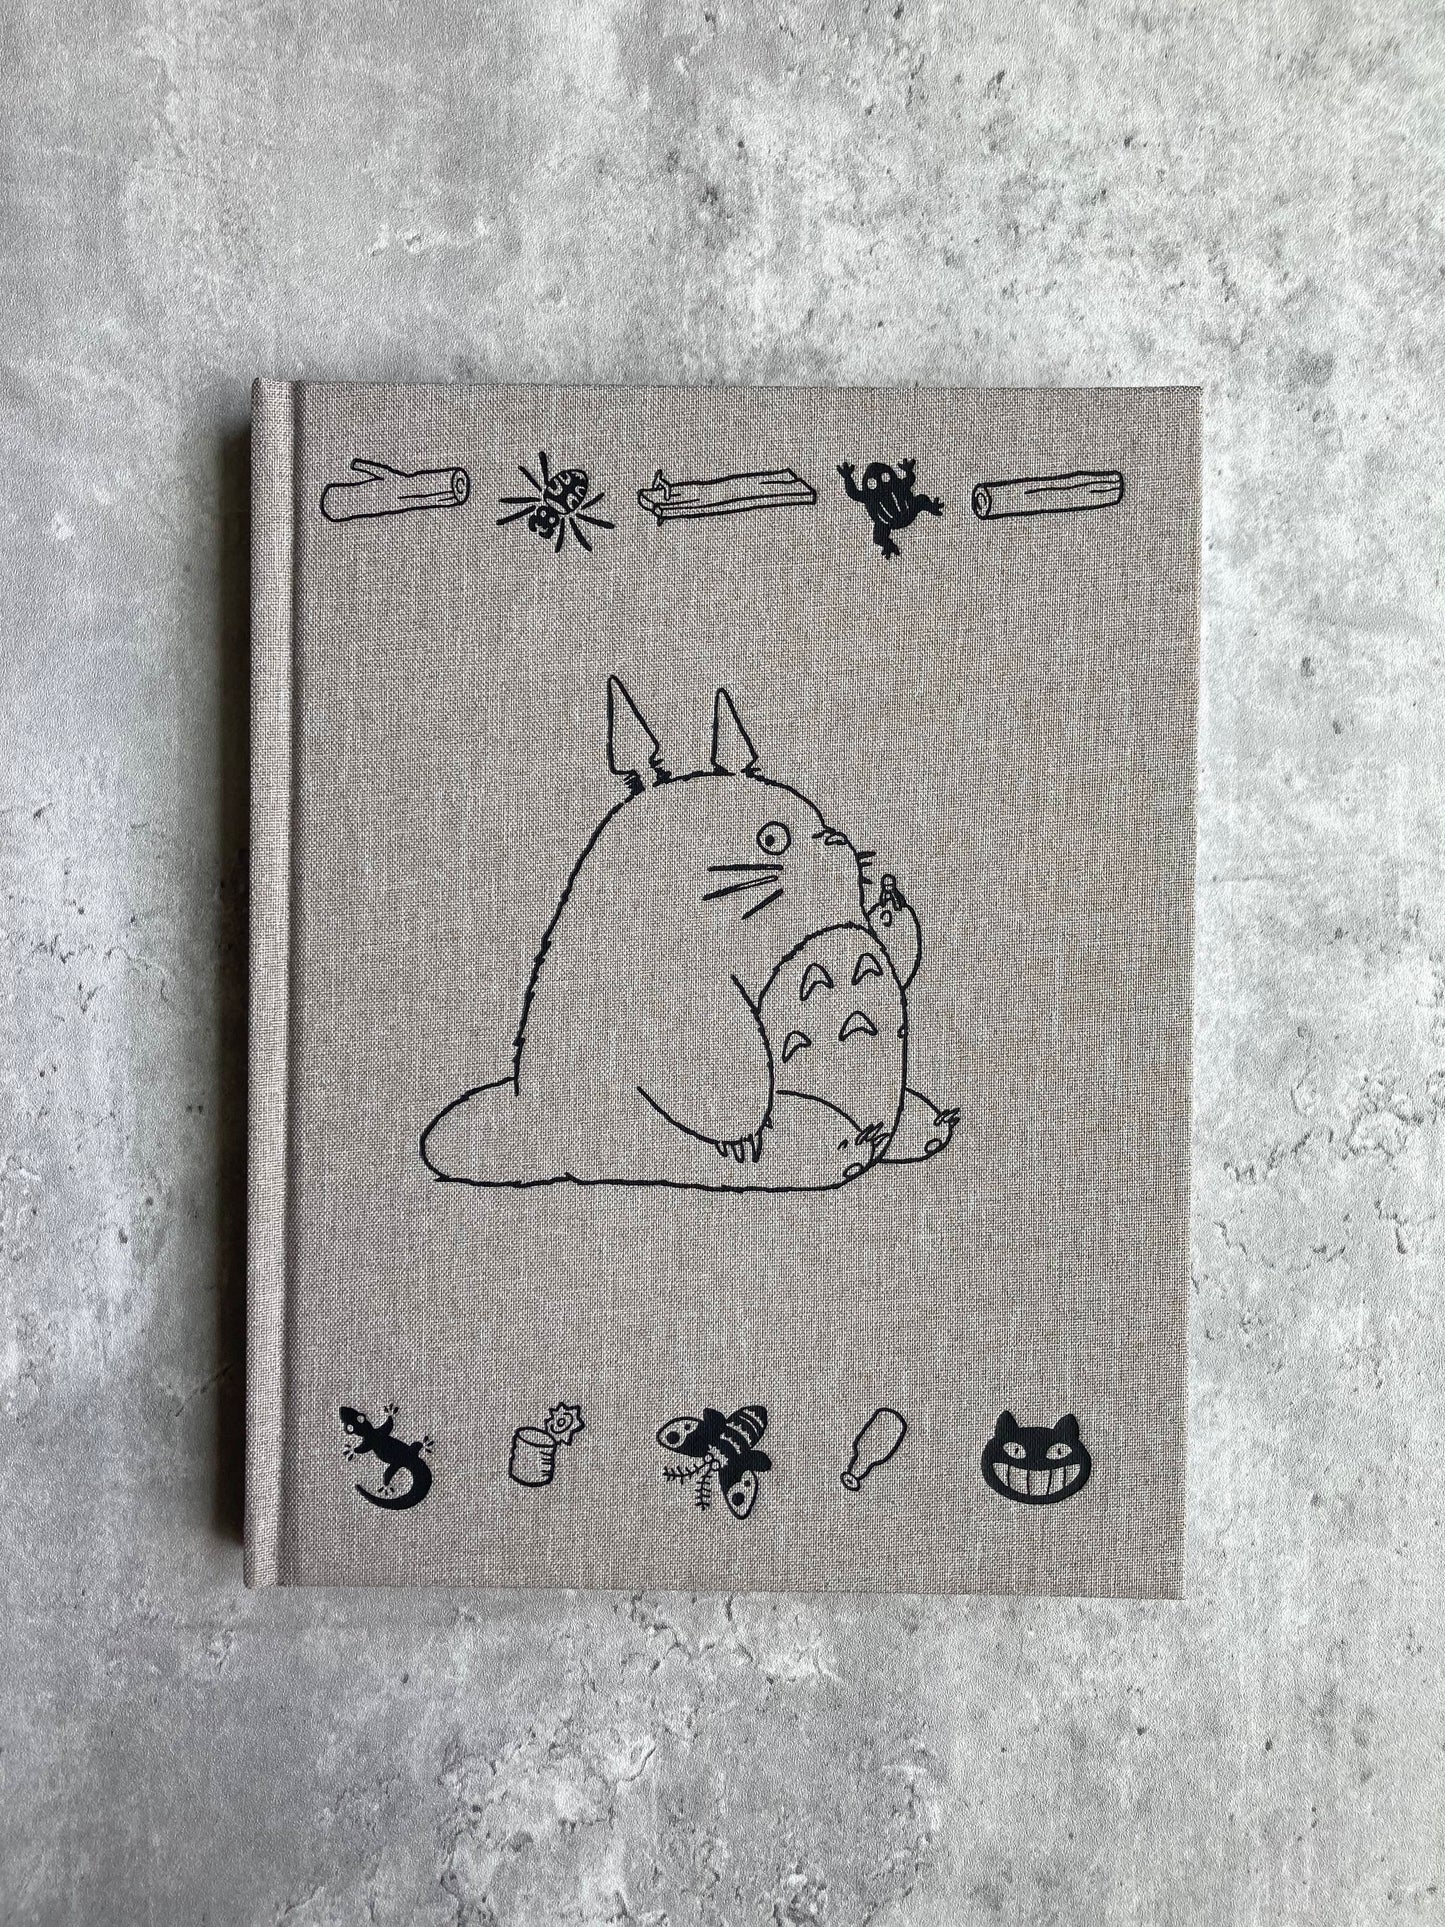 Cover of My Neighbor Totoro Sketchbook by Studio Ghibli and Hayao Miyazaki. Shop all new and used books with The Stone Circle, the only online bookstore near you. 